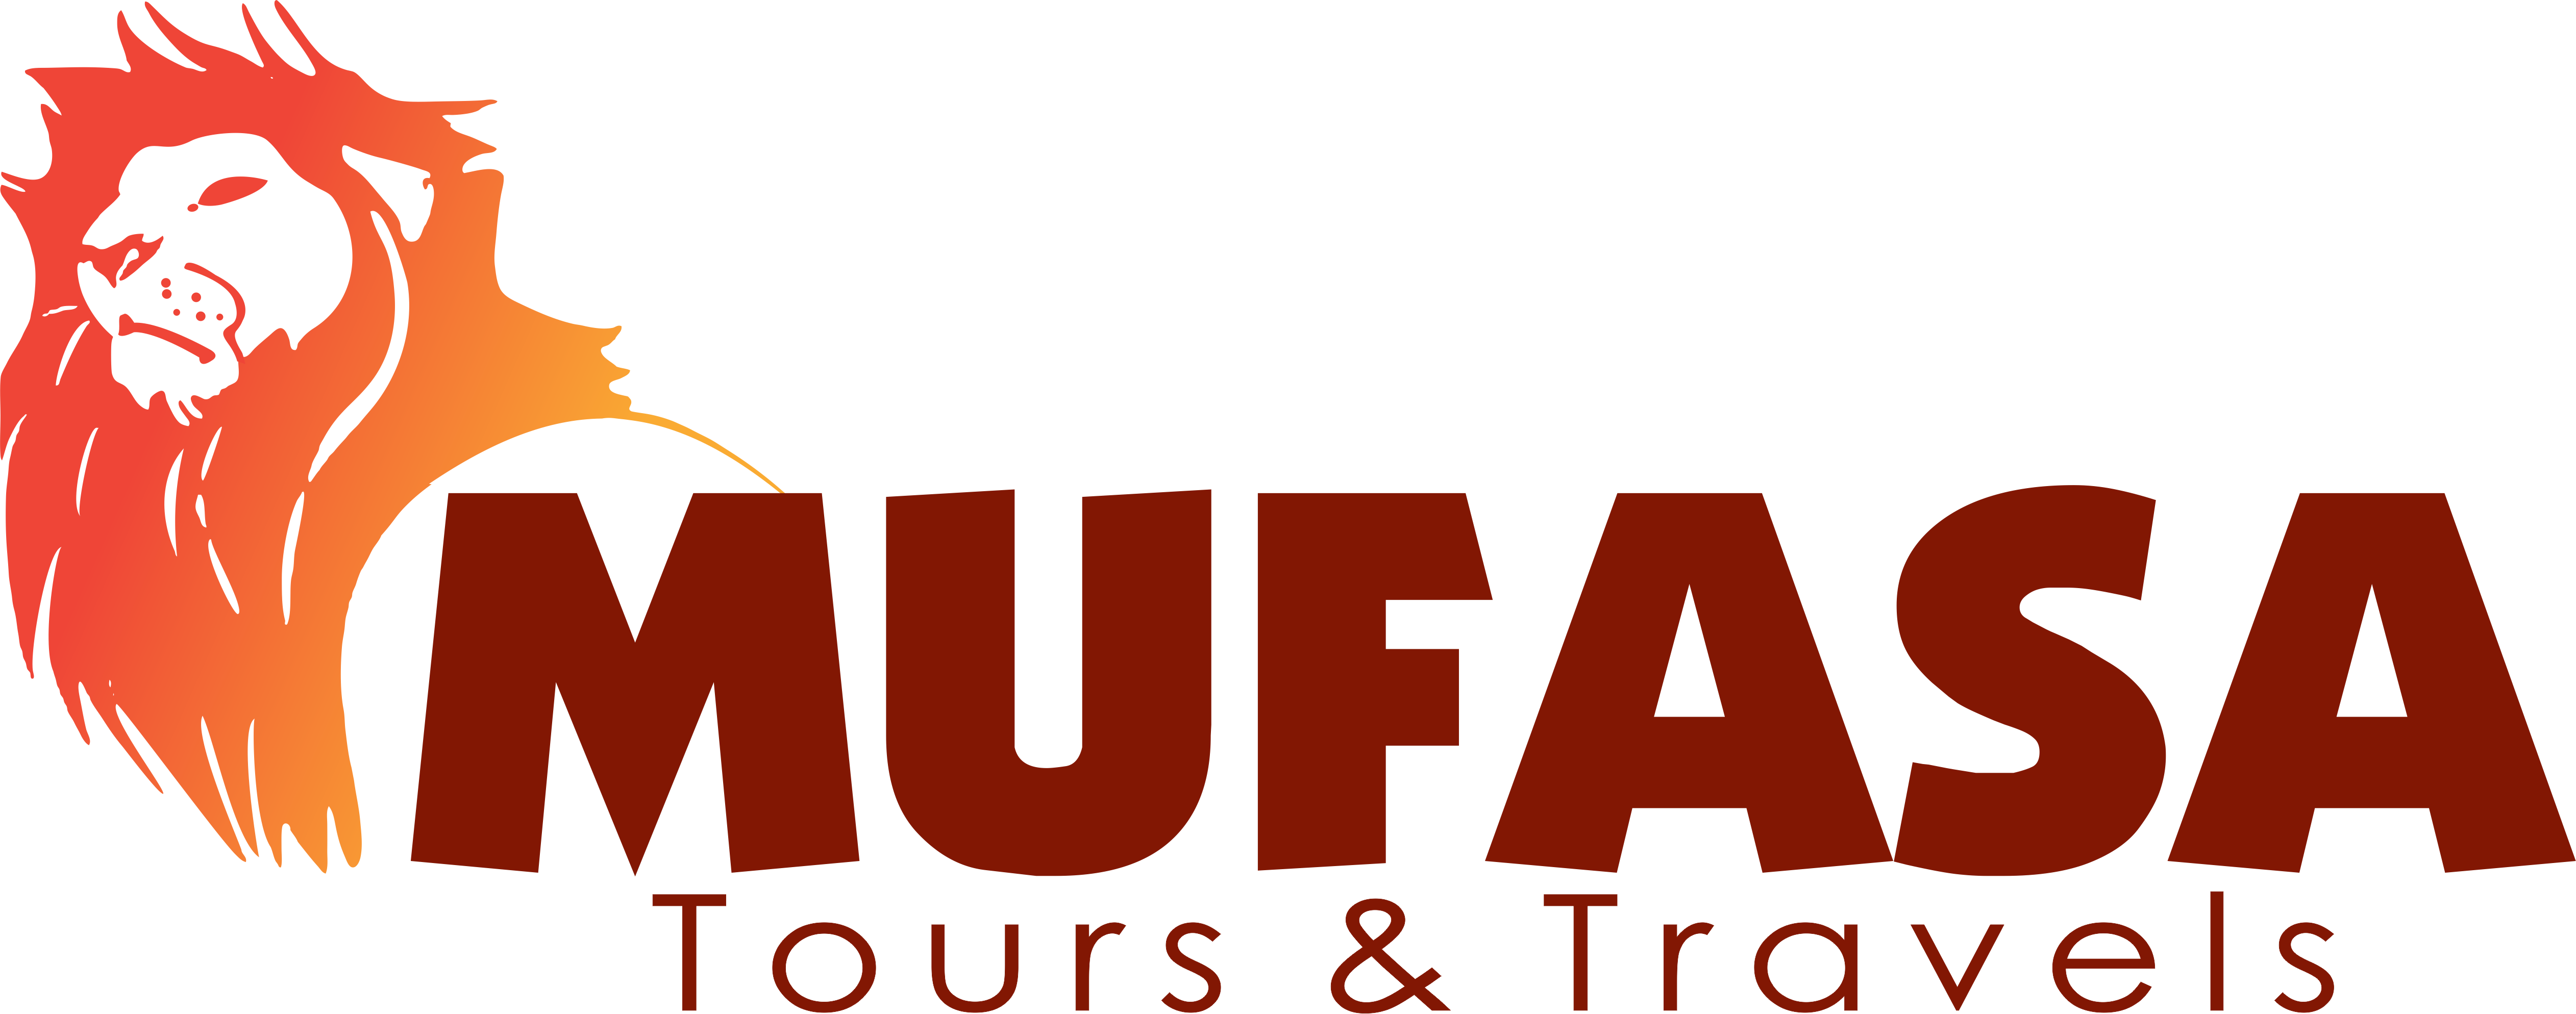 Mufasa Tours and Travels | 9 Day Packages - Mufasa Tours and Travels